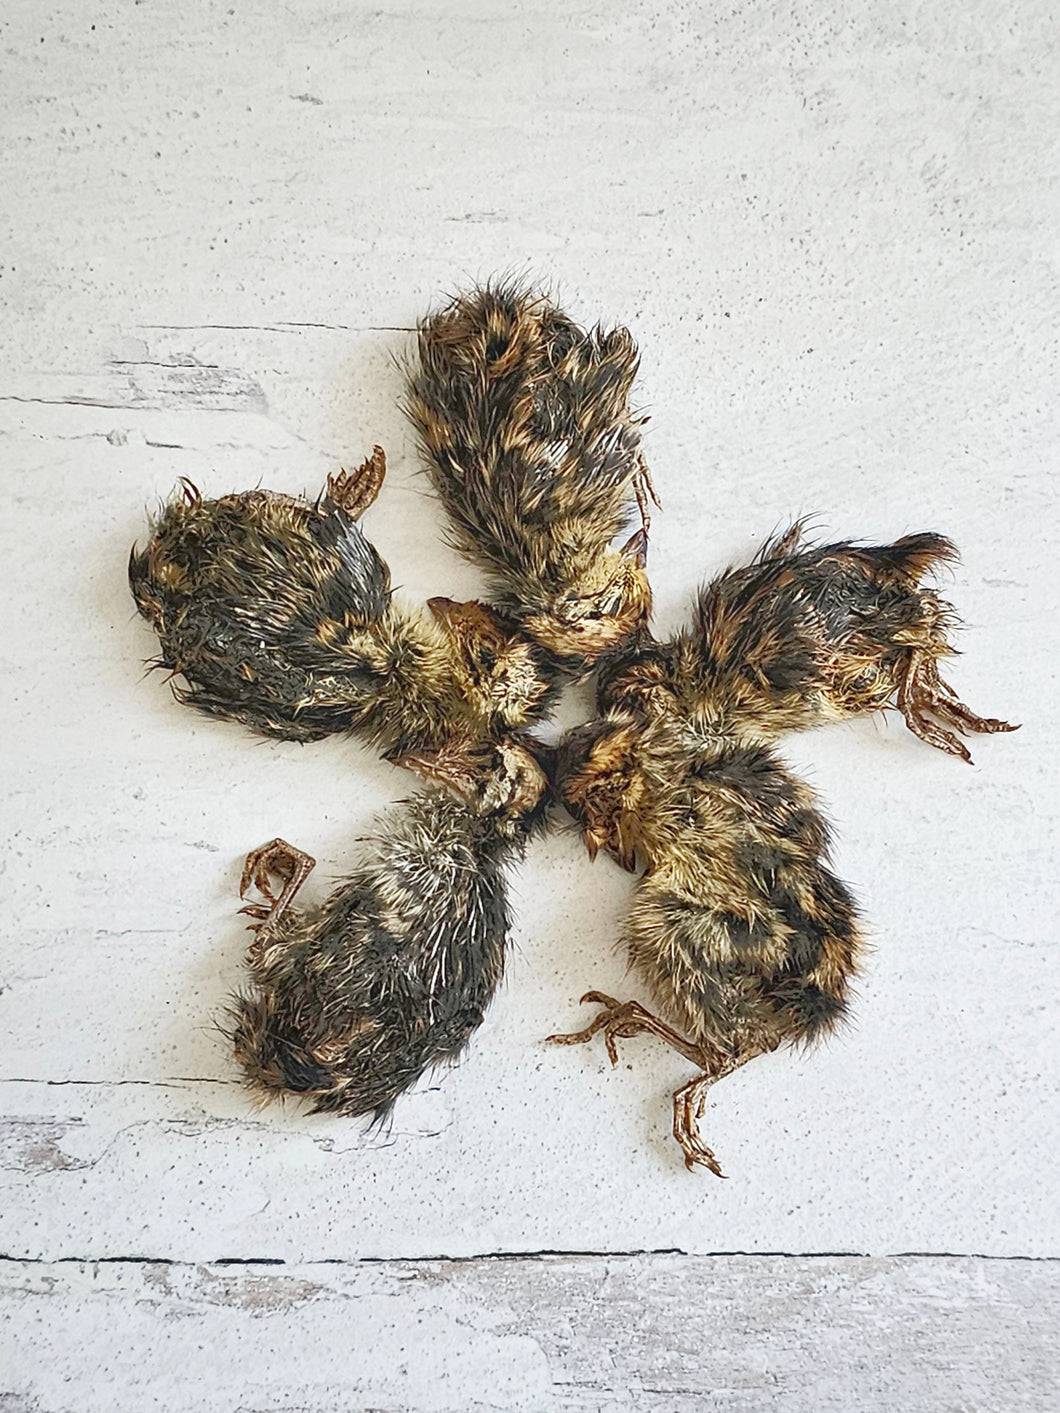 Whole Prey Quail Hatchlings (Feathered)